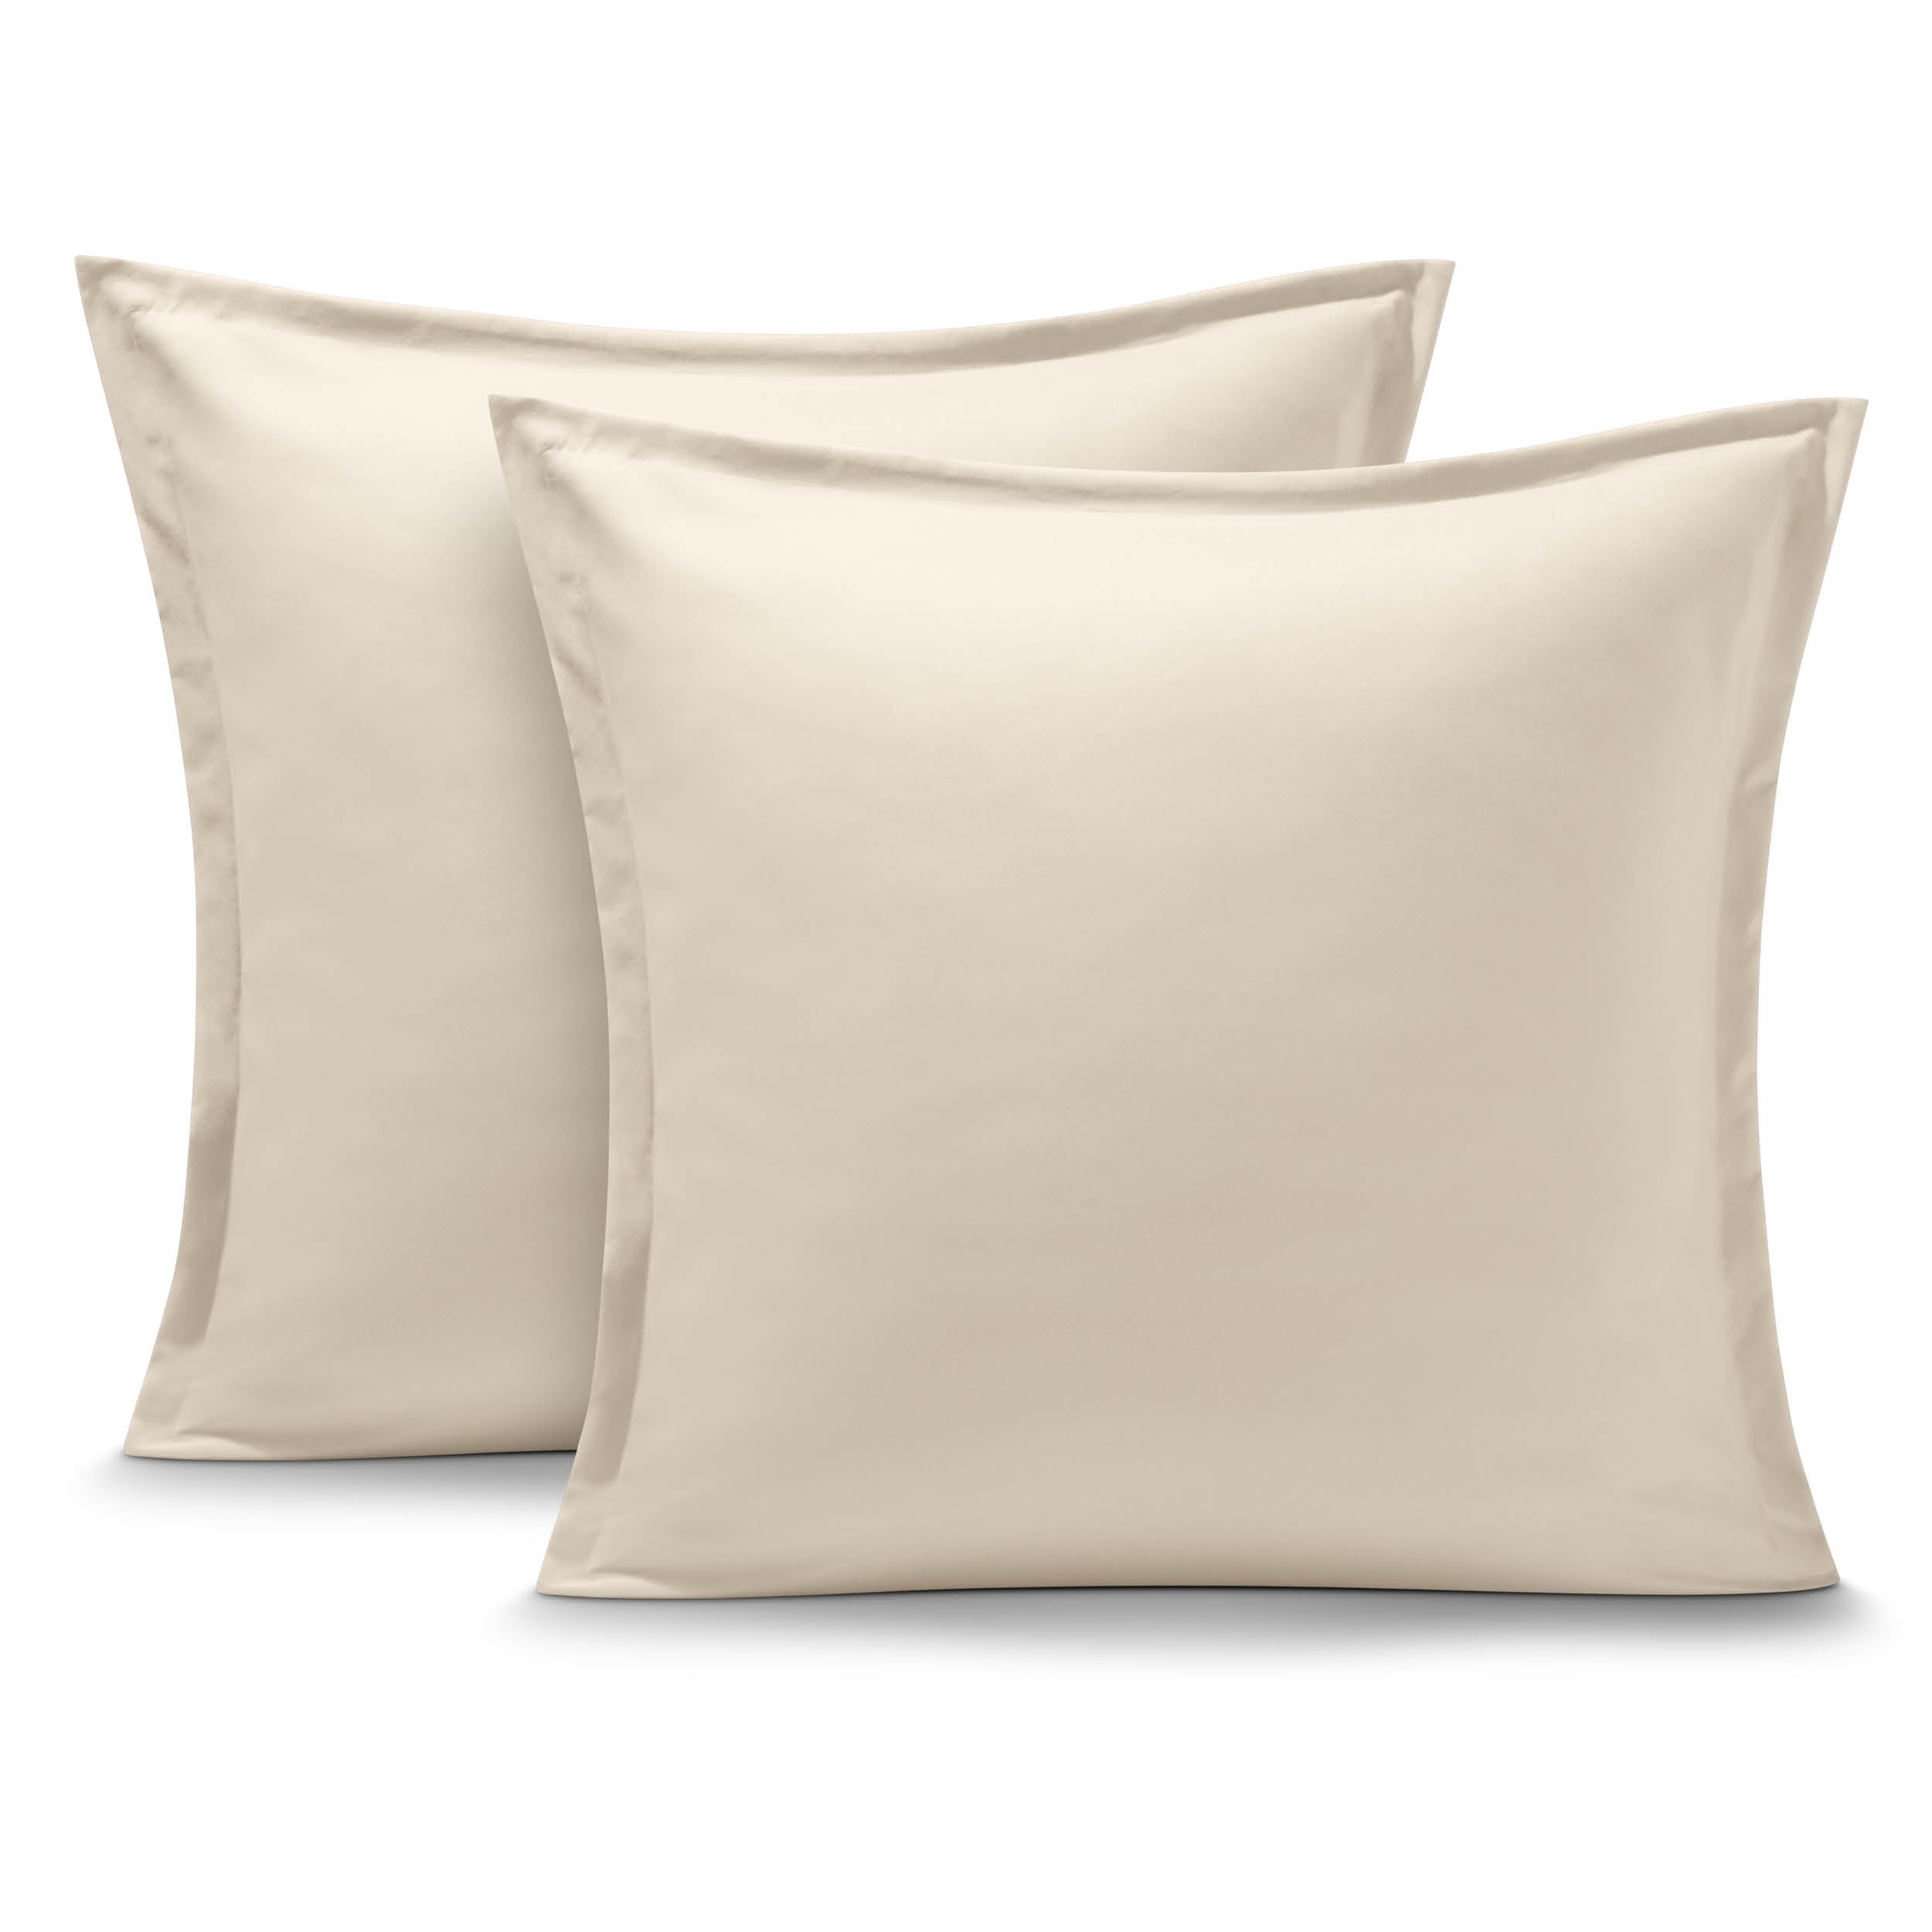 Two pillow shams on pillows standing up with one behind the other